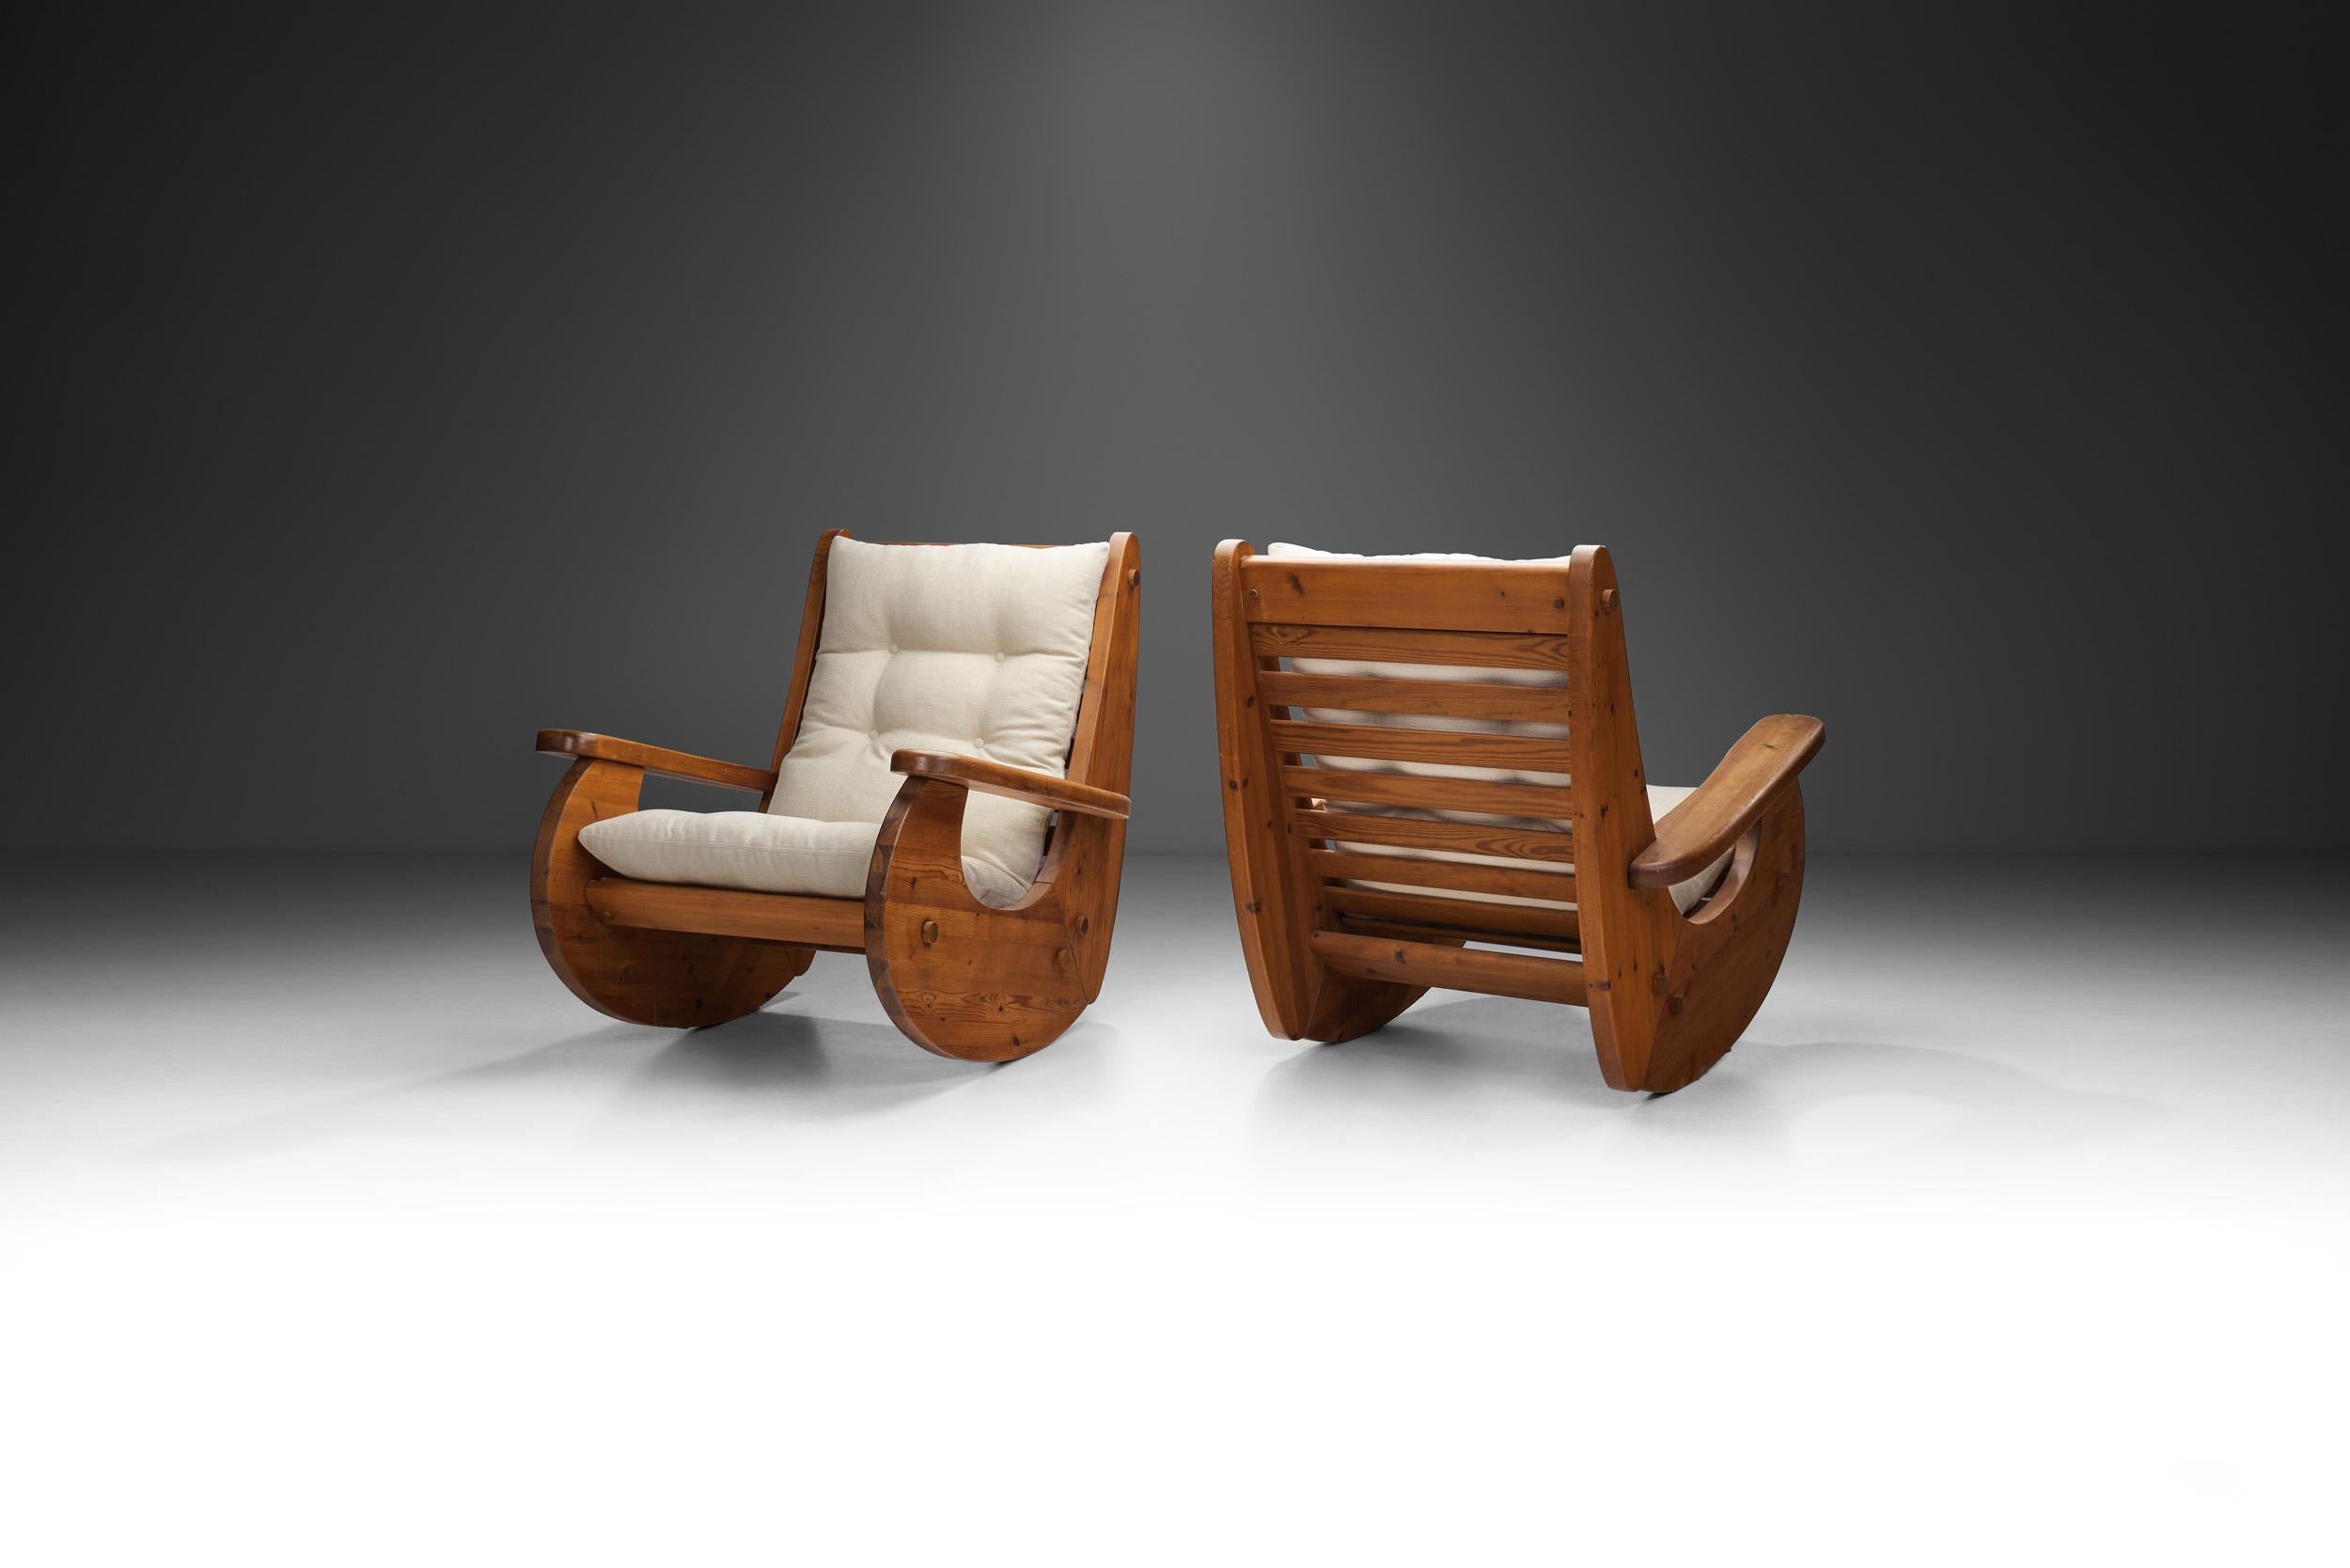 These rocking chairs, born from the era's penchant for Brutalist design, manage to strike an intriguing balance between the rugged and the refined. The 1970s marked a distinctive period in design, and the Brutalist movement, characterized by its